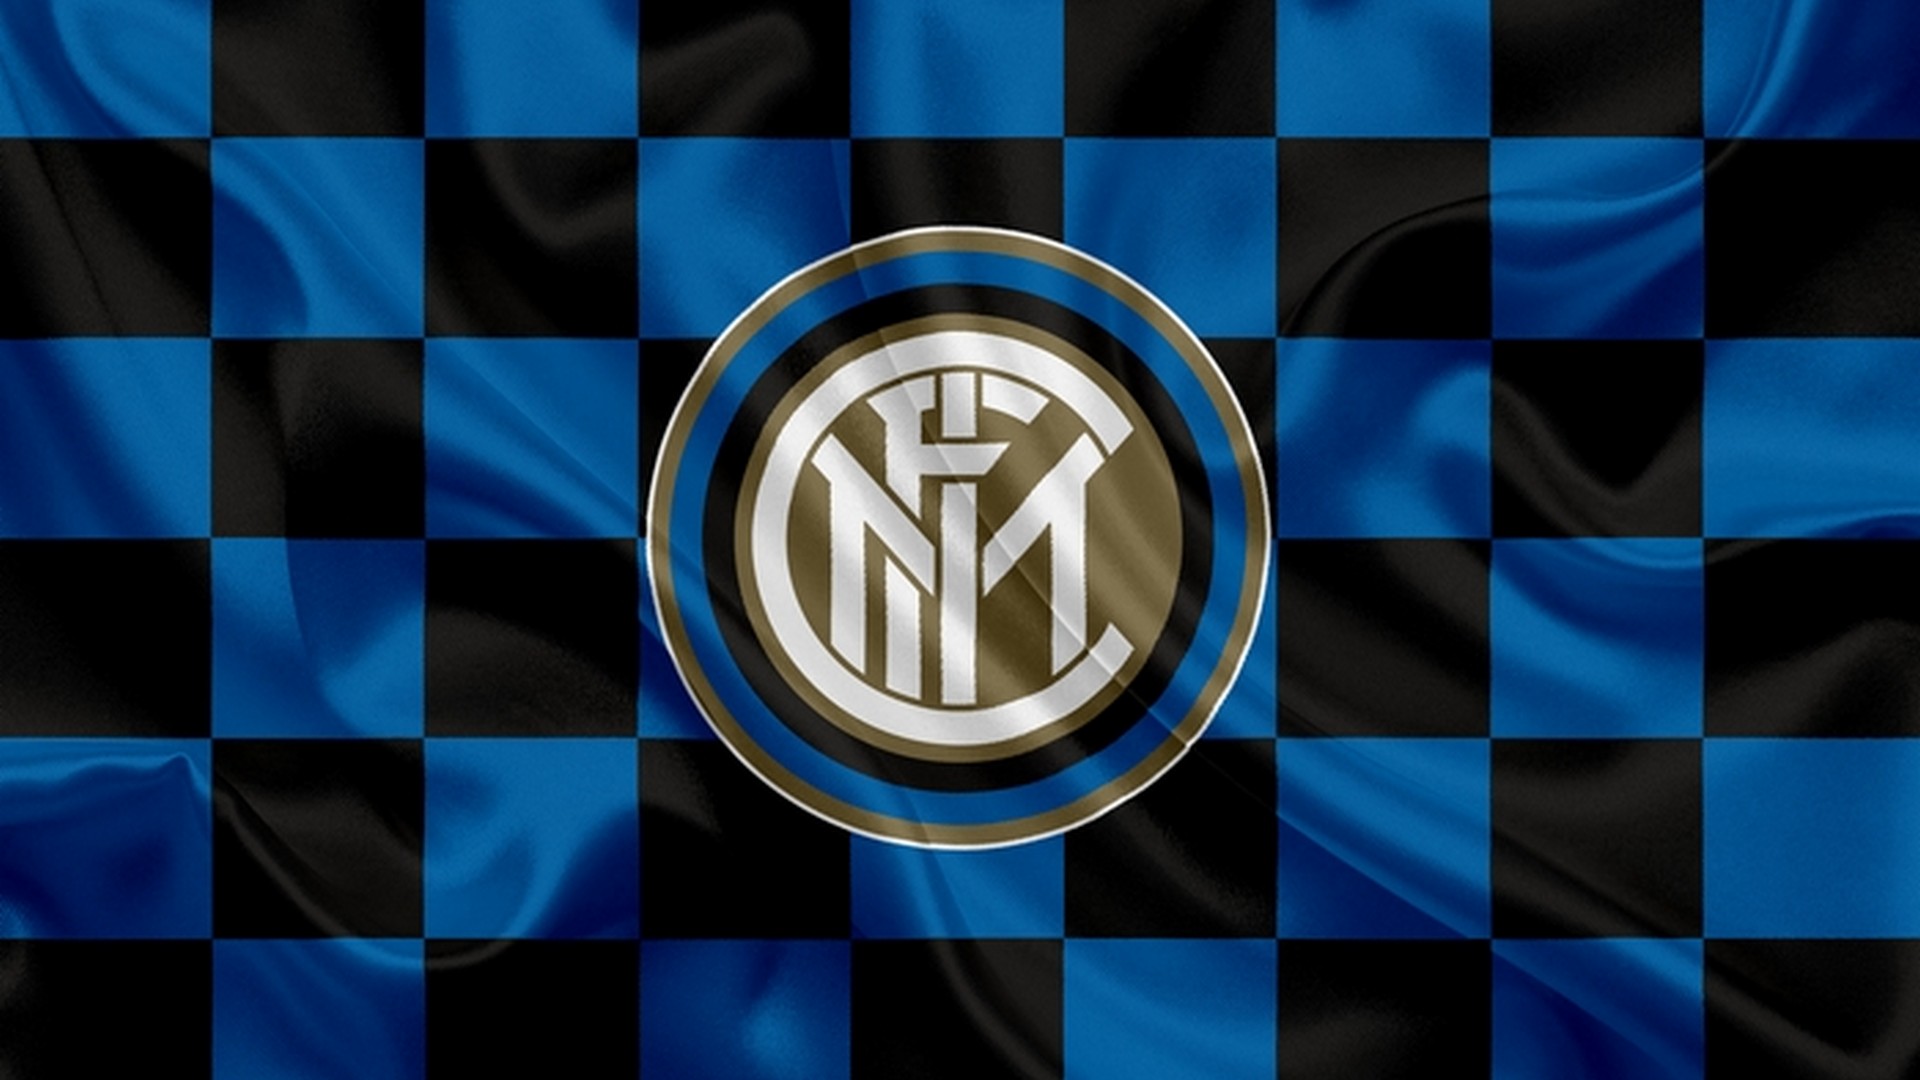 Wallpapers Hd Inter Milan With High-resolution Pixel - Inter Milan Wallpaper 2019 - HD Wallpaper 